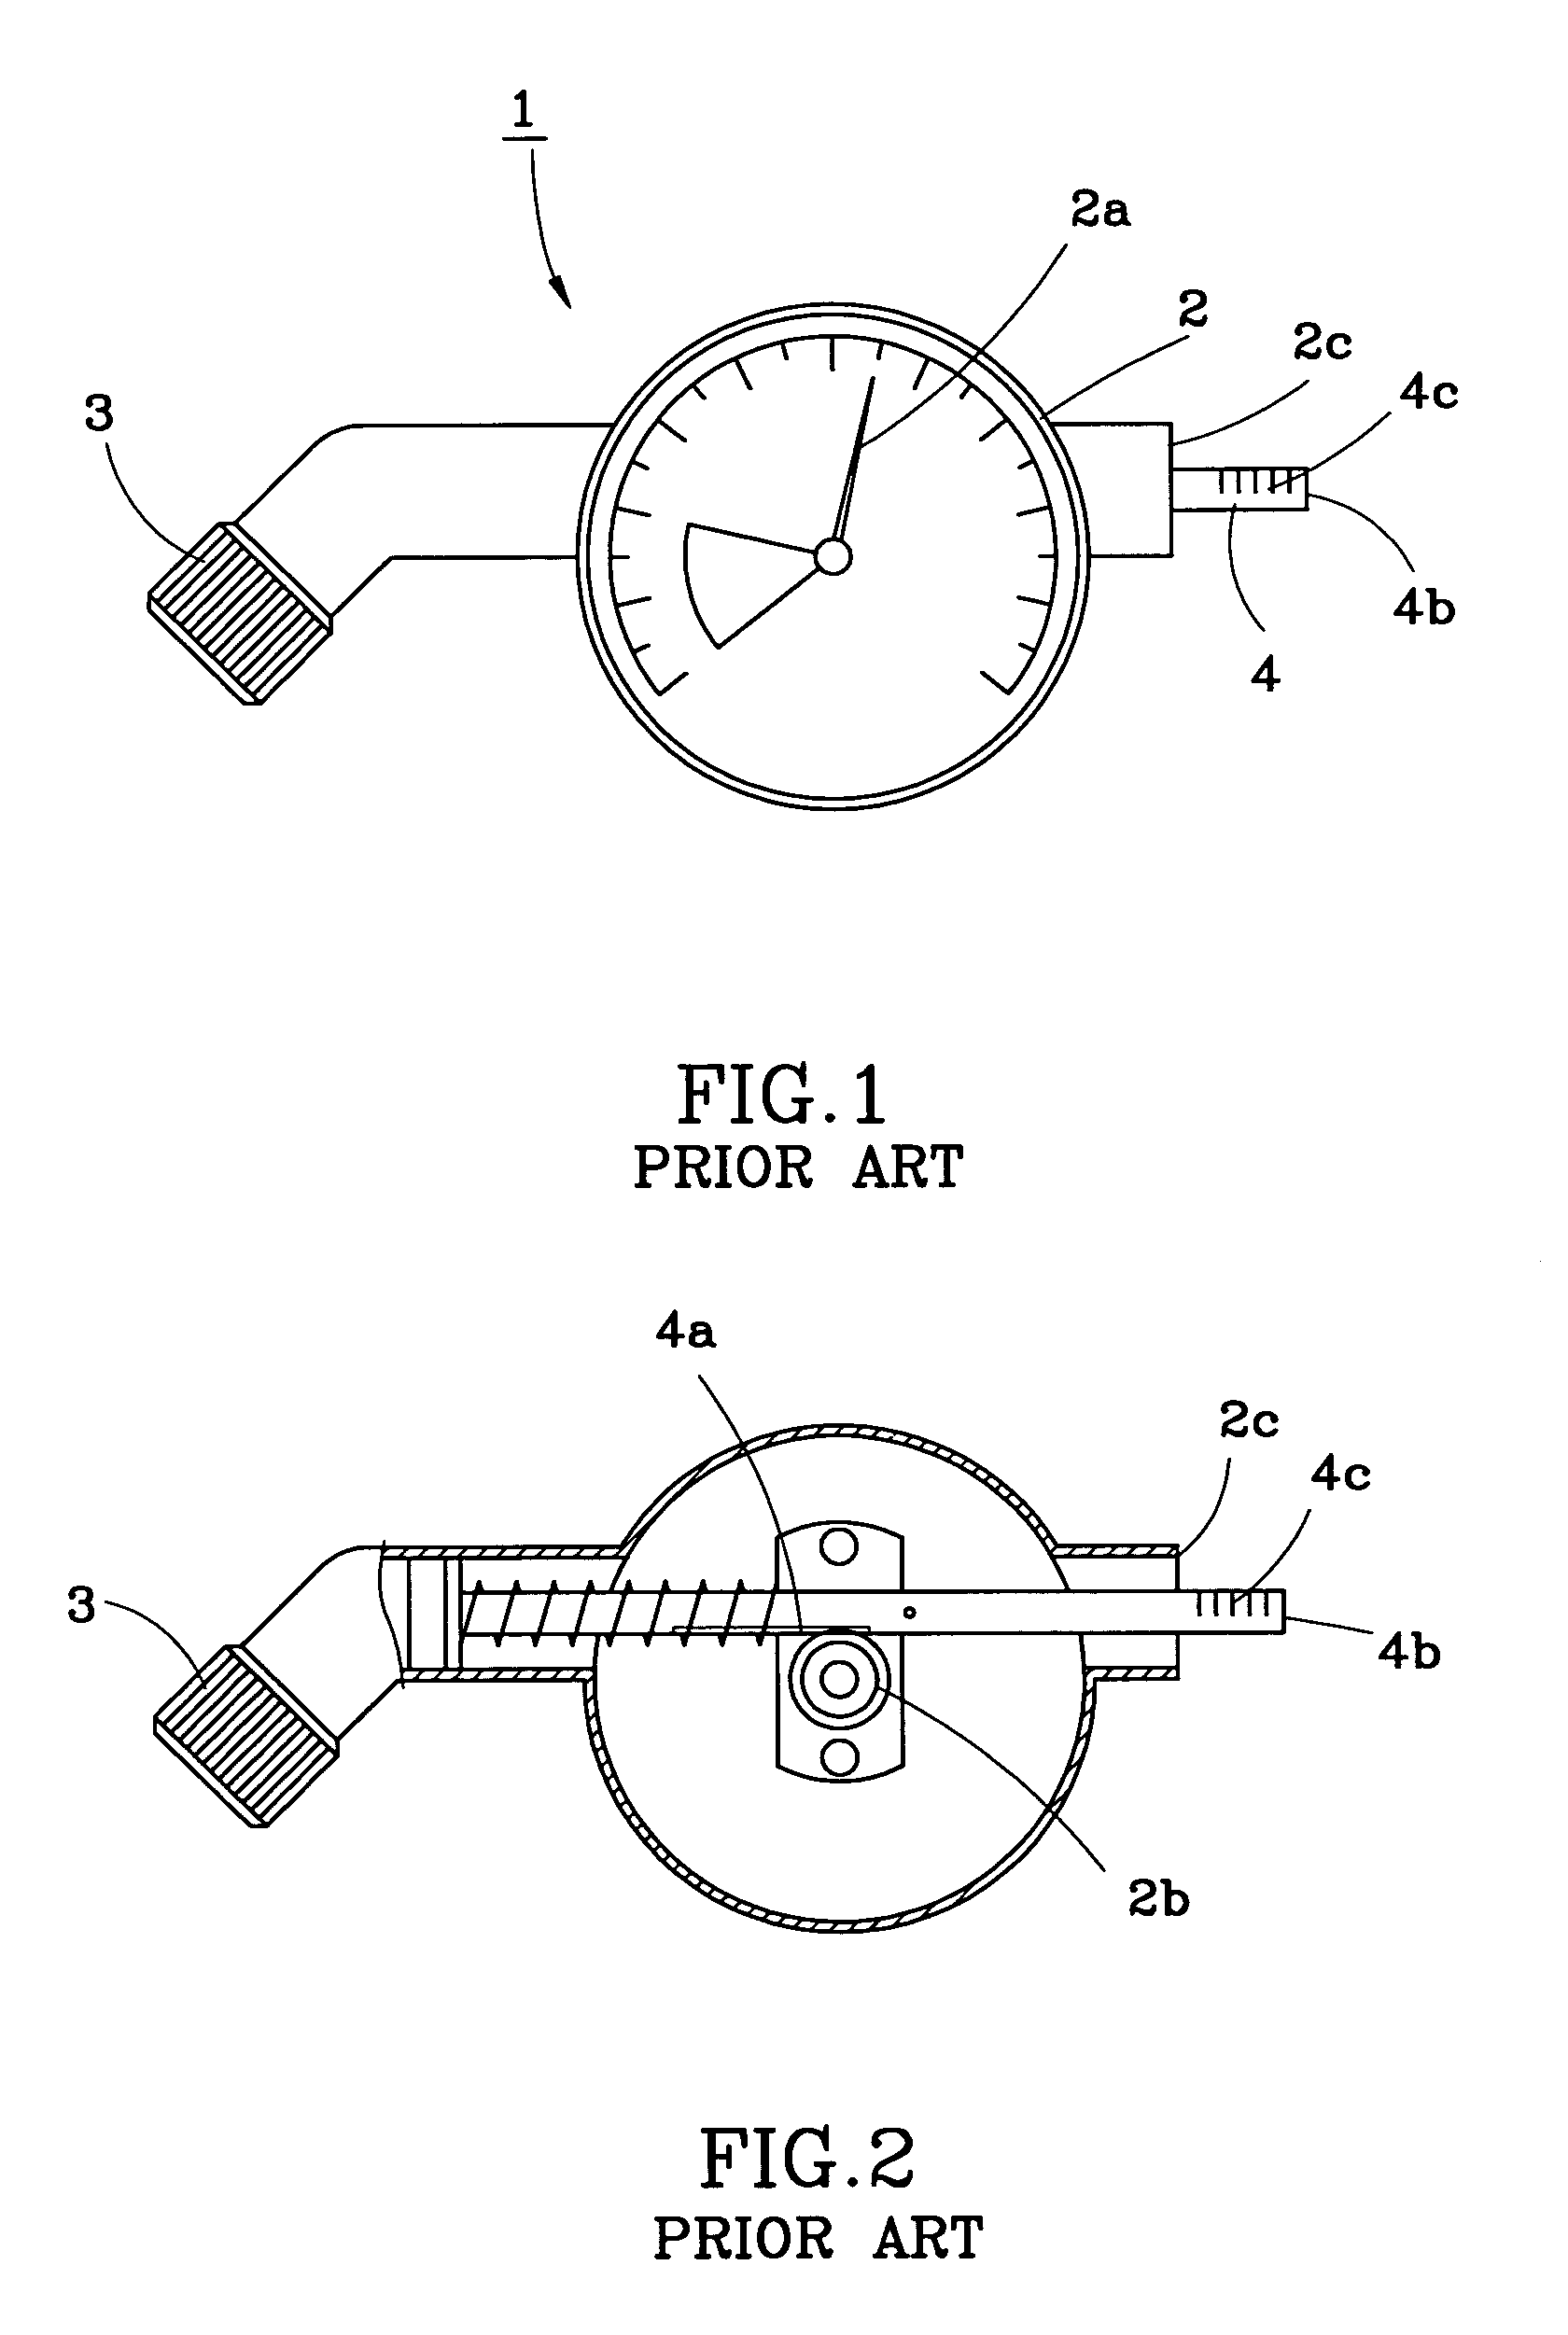 Electronic measuring device for measuring the pressure and tread depth of a tire